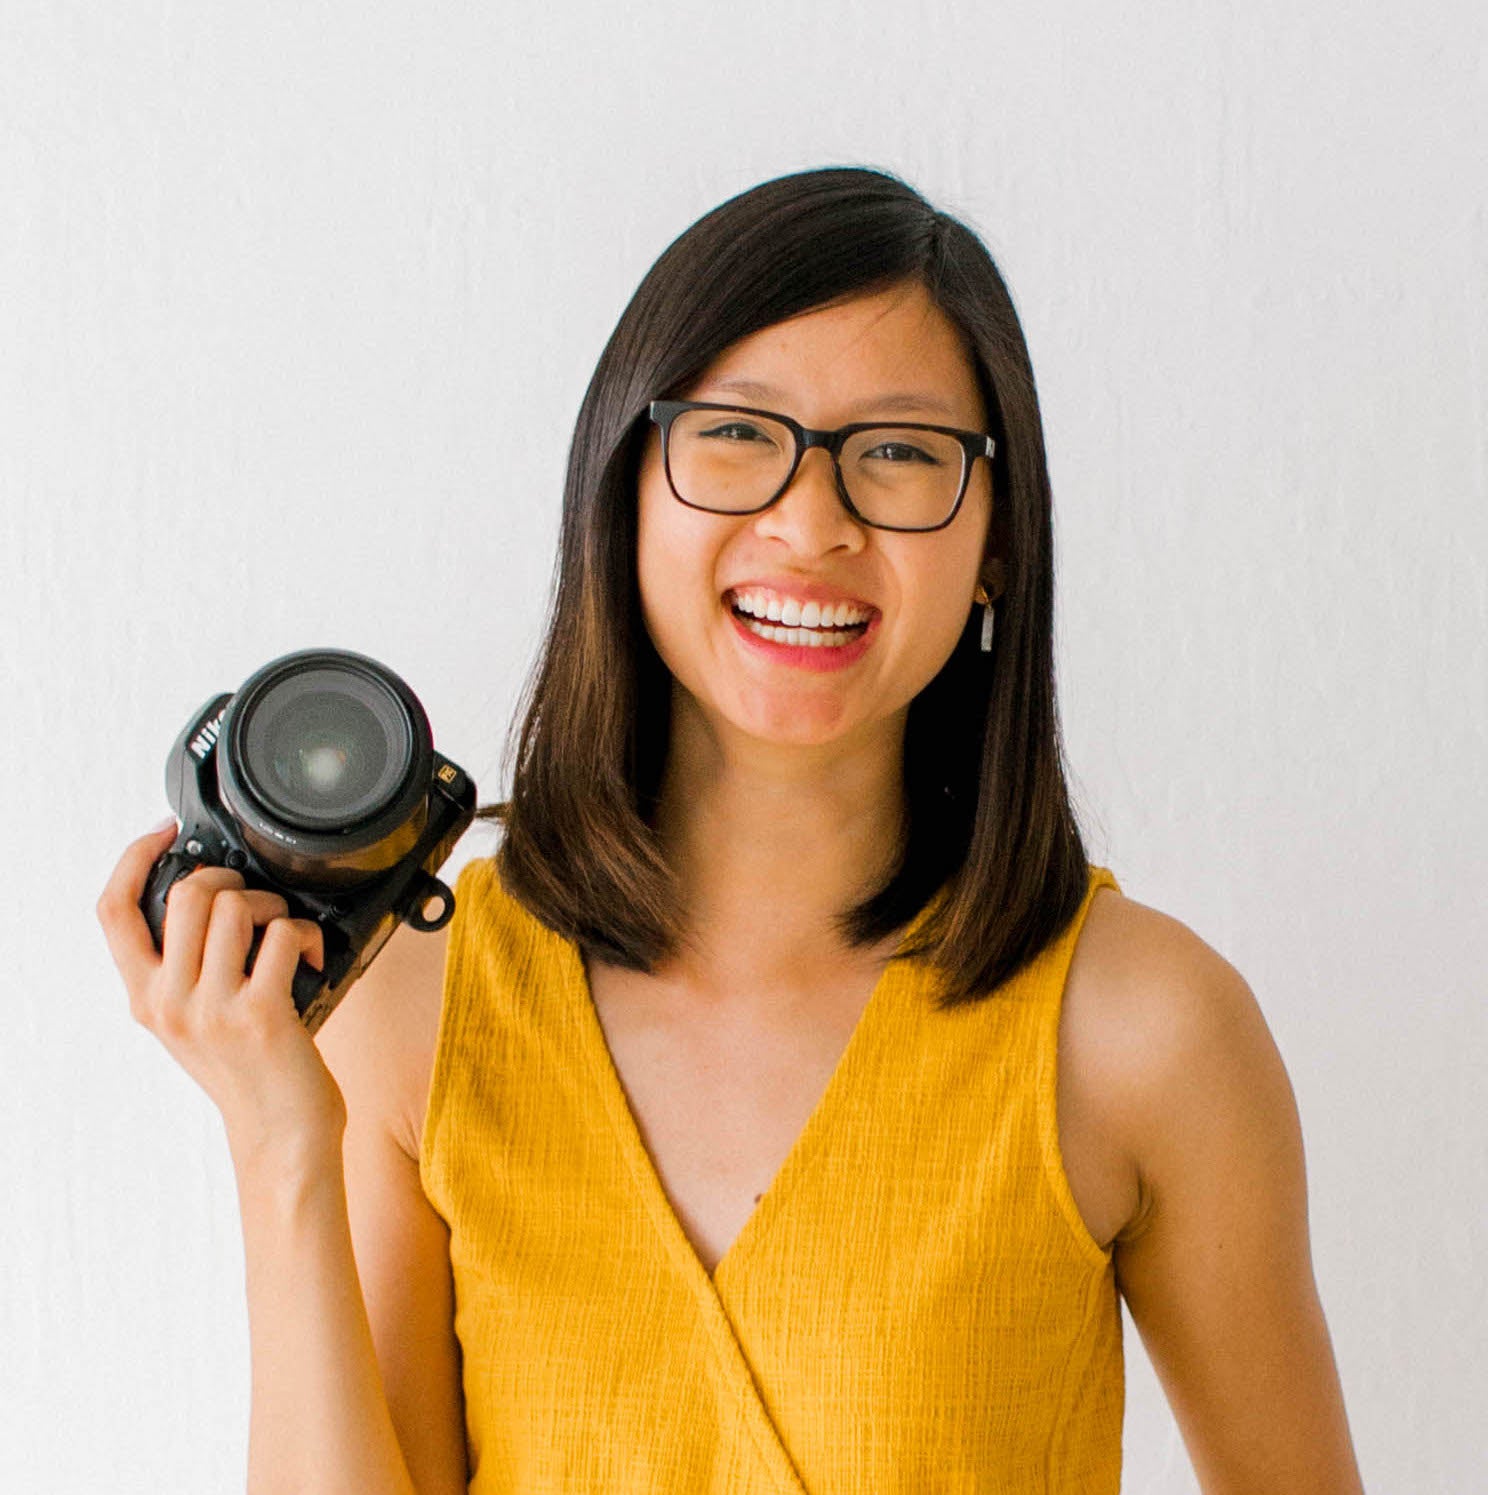 Women Hustle: Emily Huynh from Emily Kim Photography Green-Beauty Co